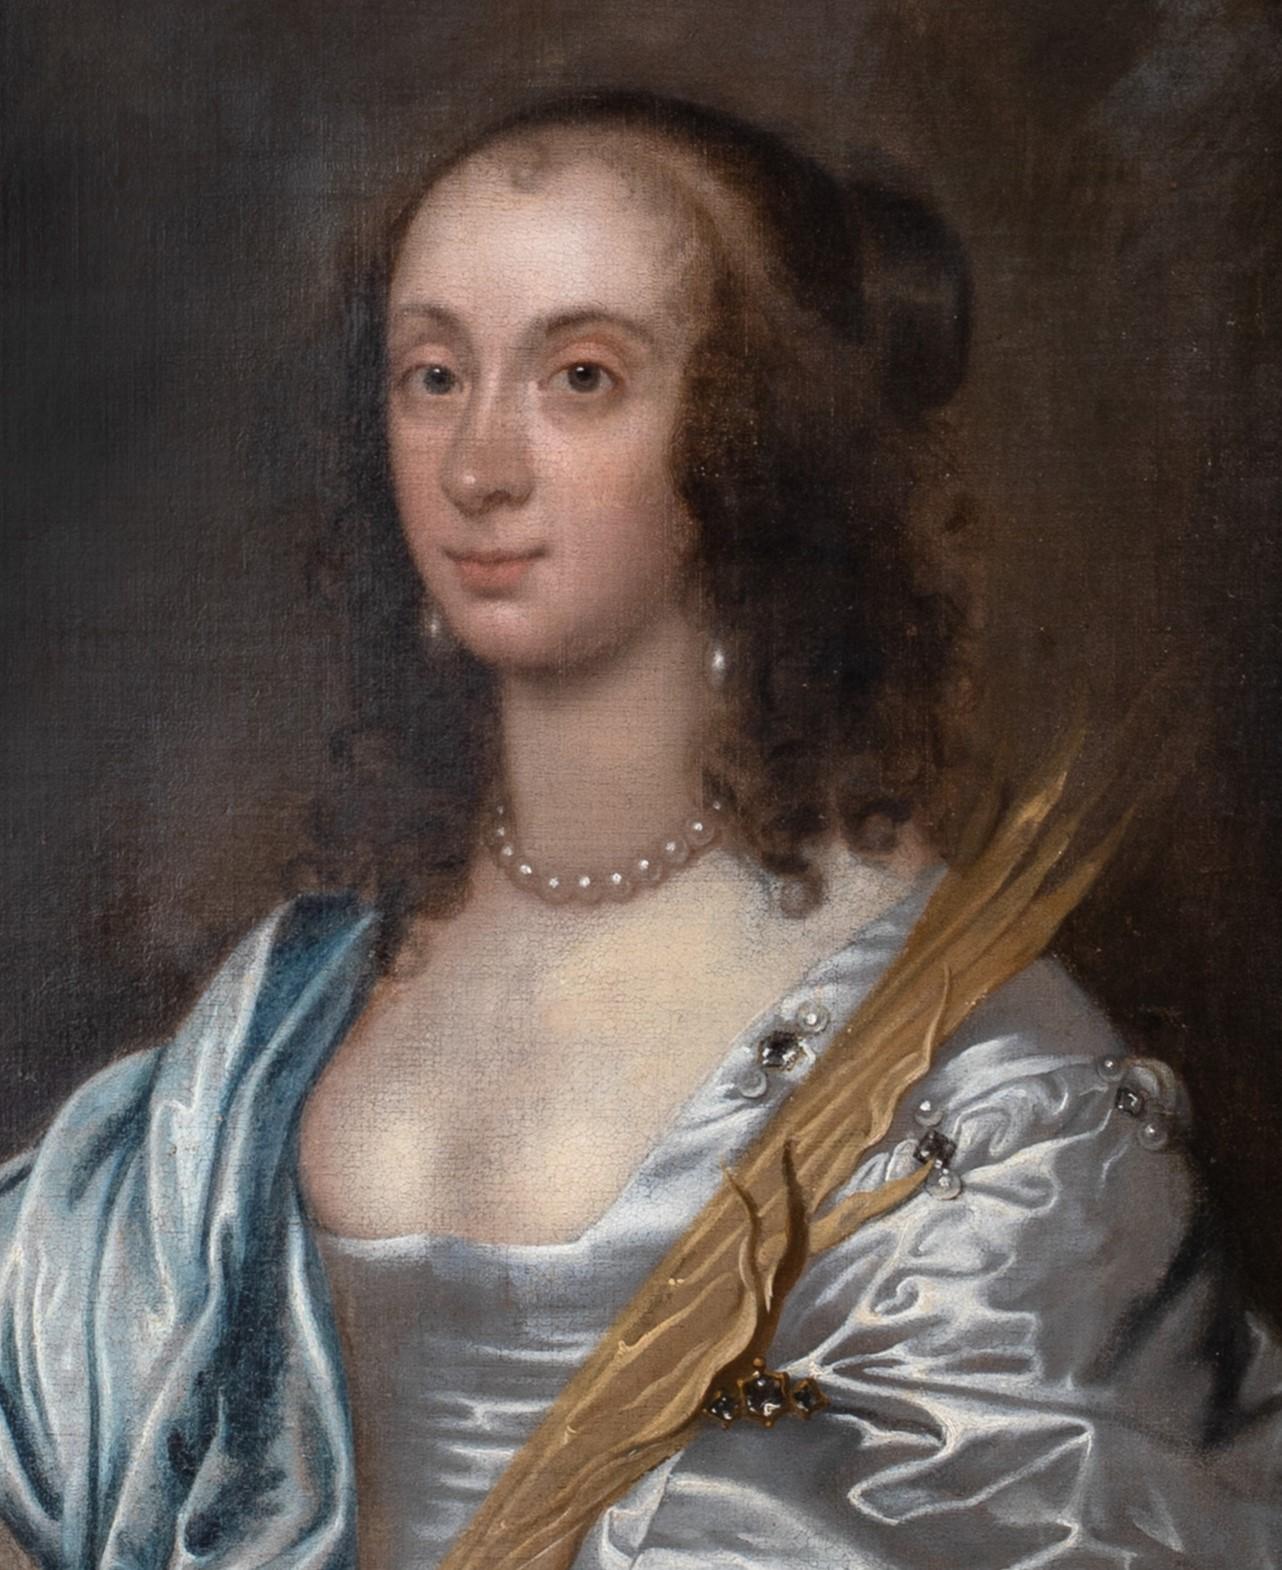 Portrait Of Lady Mary Villiers, later Duchess of Richmond and Lennox (1622-1685), As Saint Agnes, 17th Century

after Anthony VAN DTCK (1599-1641)

Portrait Of Lady Mary Villiers, later Duchess of Richmond and Lennox, As Saint Agnes, oil on canvas.